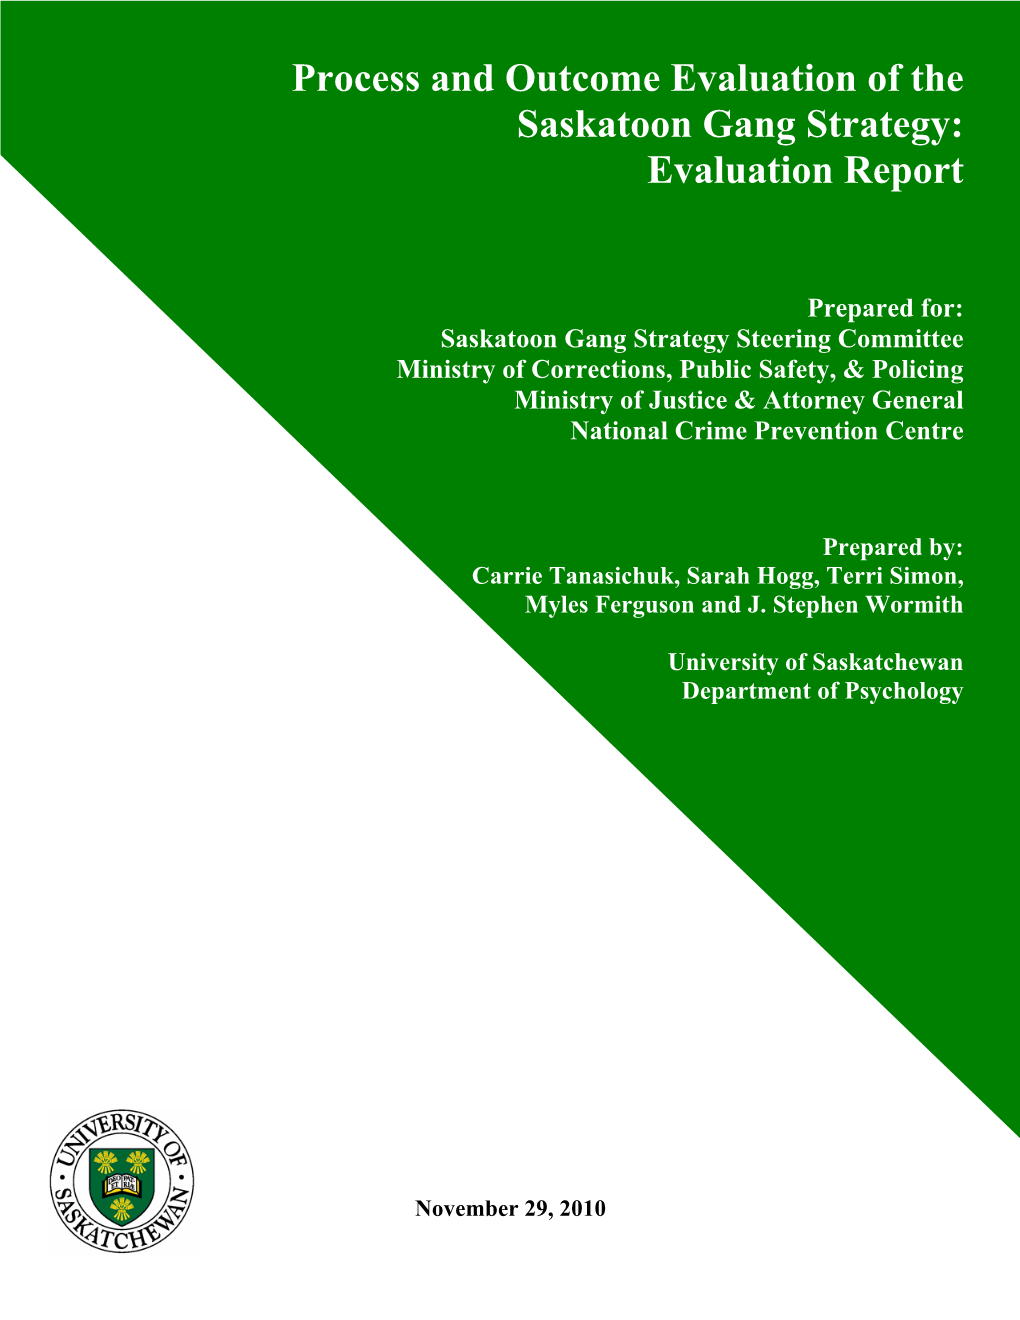 Process and Outcome Evaluation of the Saskatoon Gang Strategy: Evaluation Report